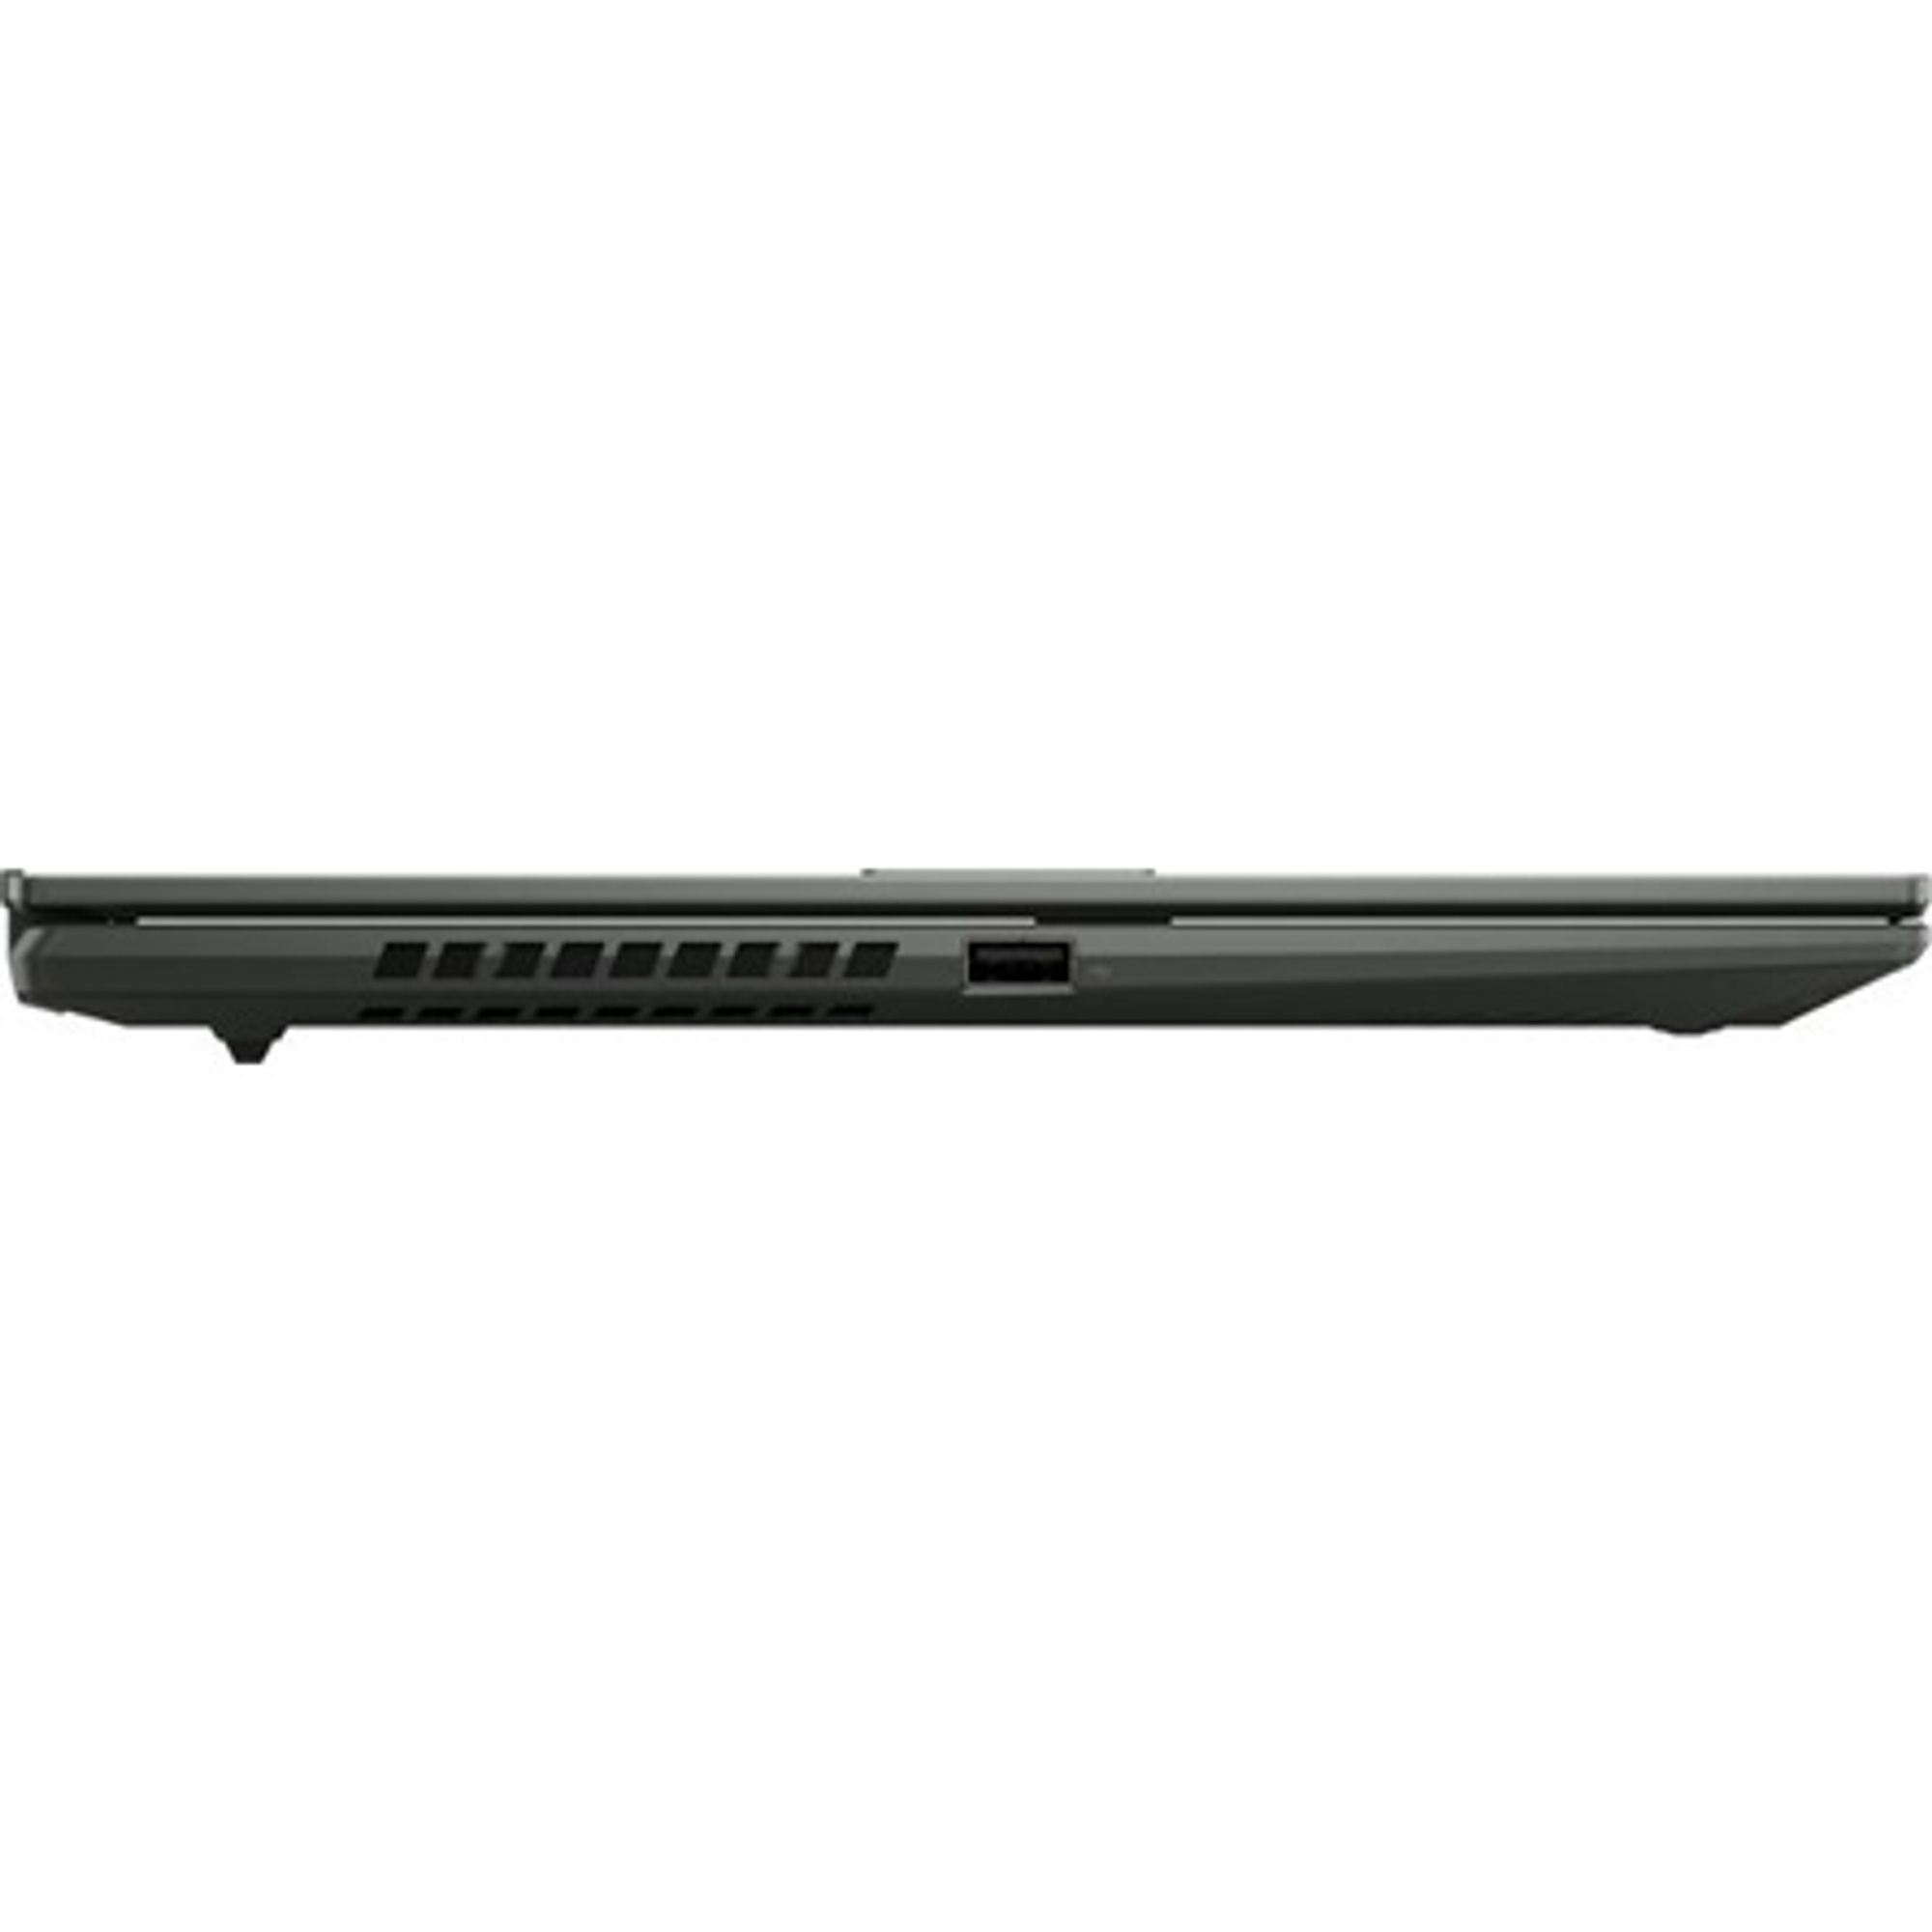 ASUS S5402ZA-M9013W Laptop / Notebook 3